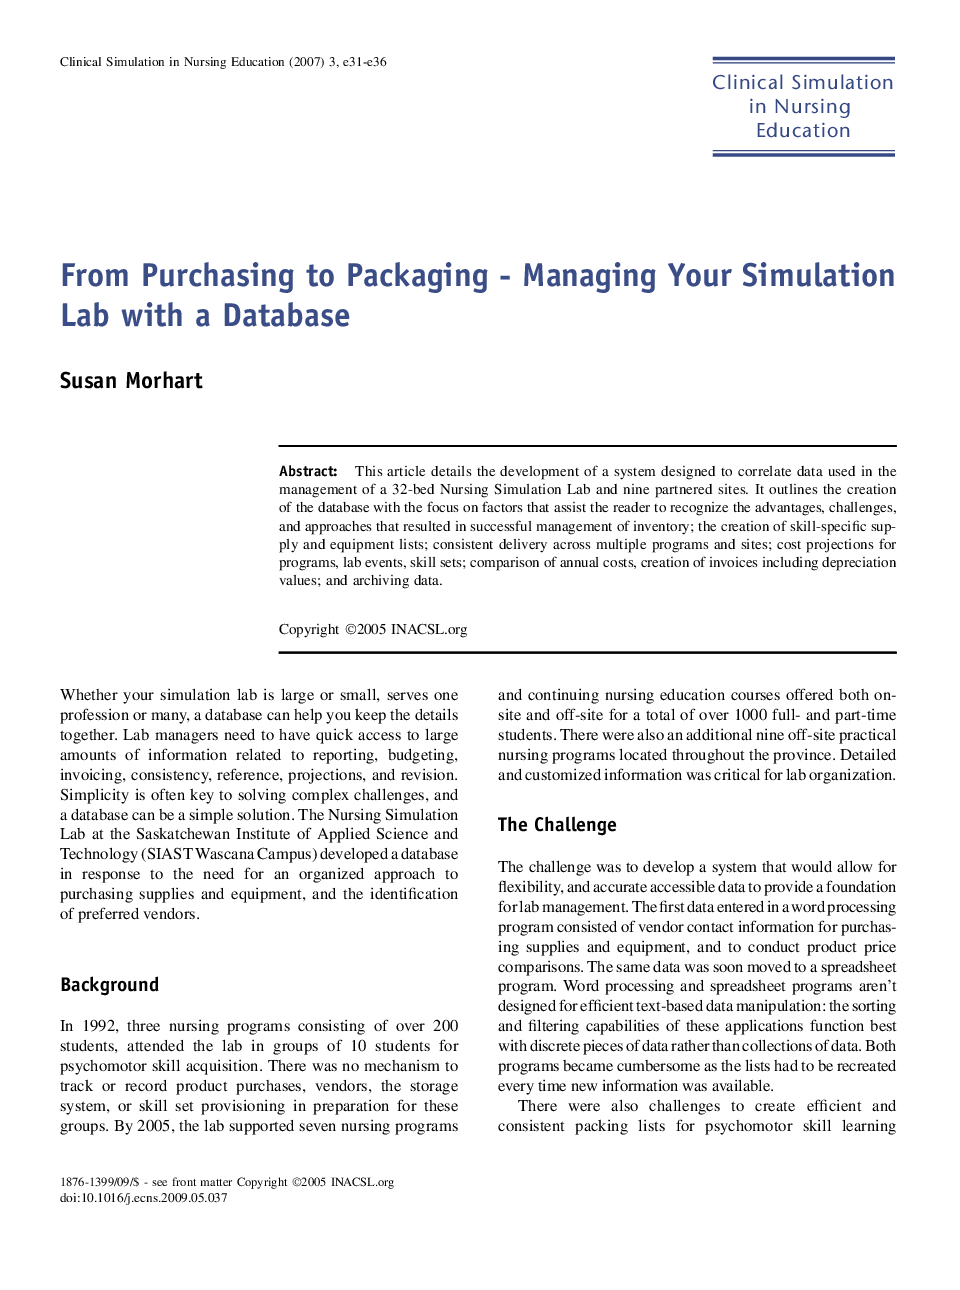 From Purchasing to Packaging - Managing Your Simulation Lab with a Database